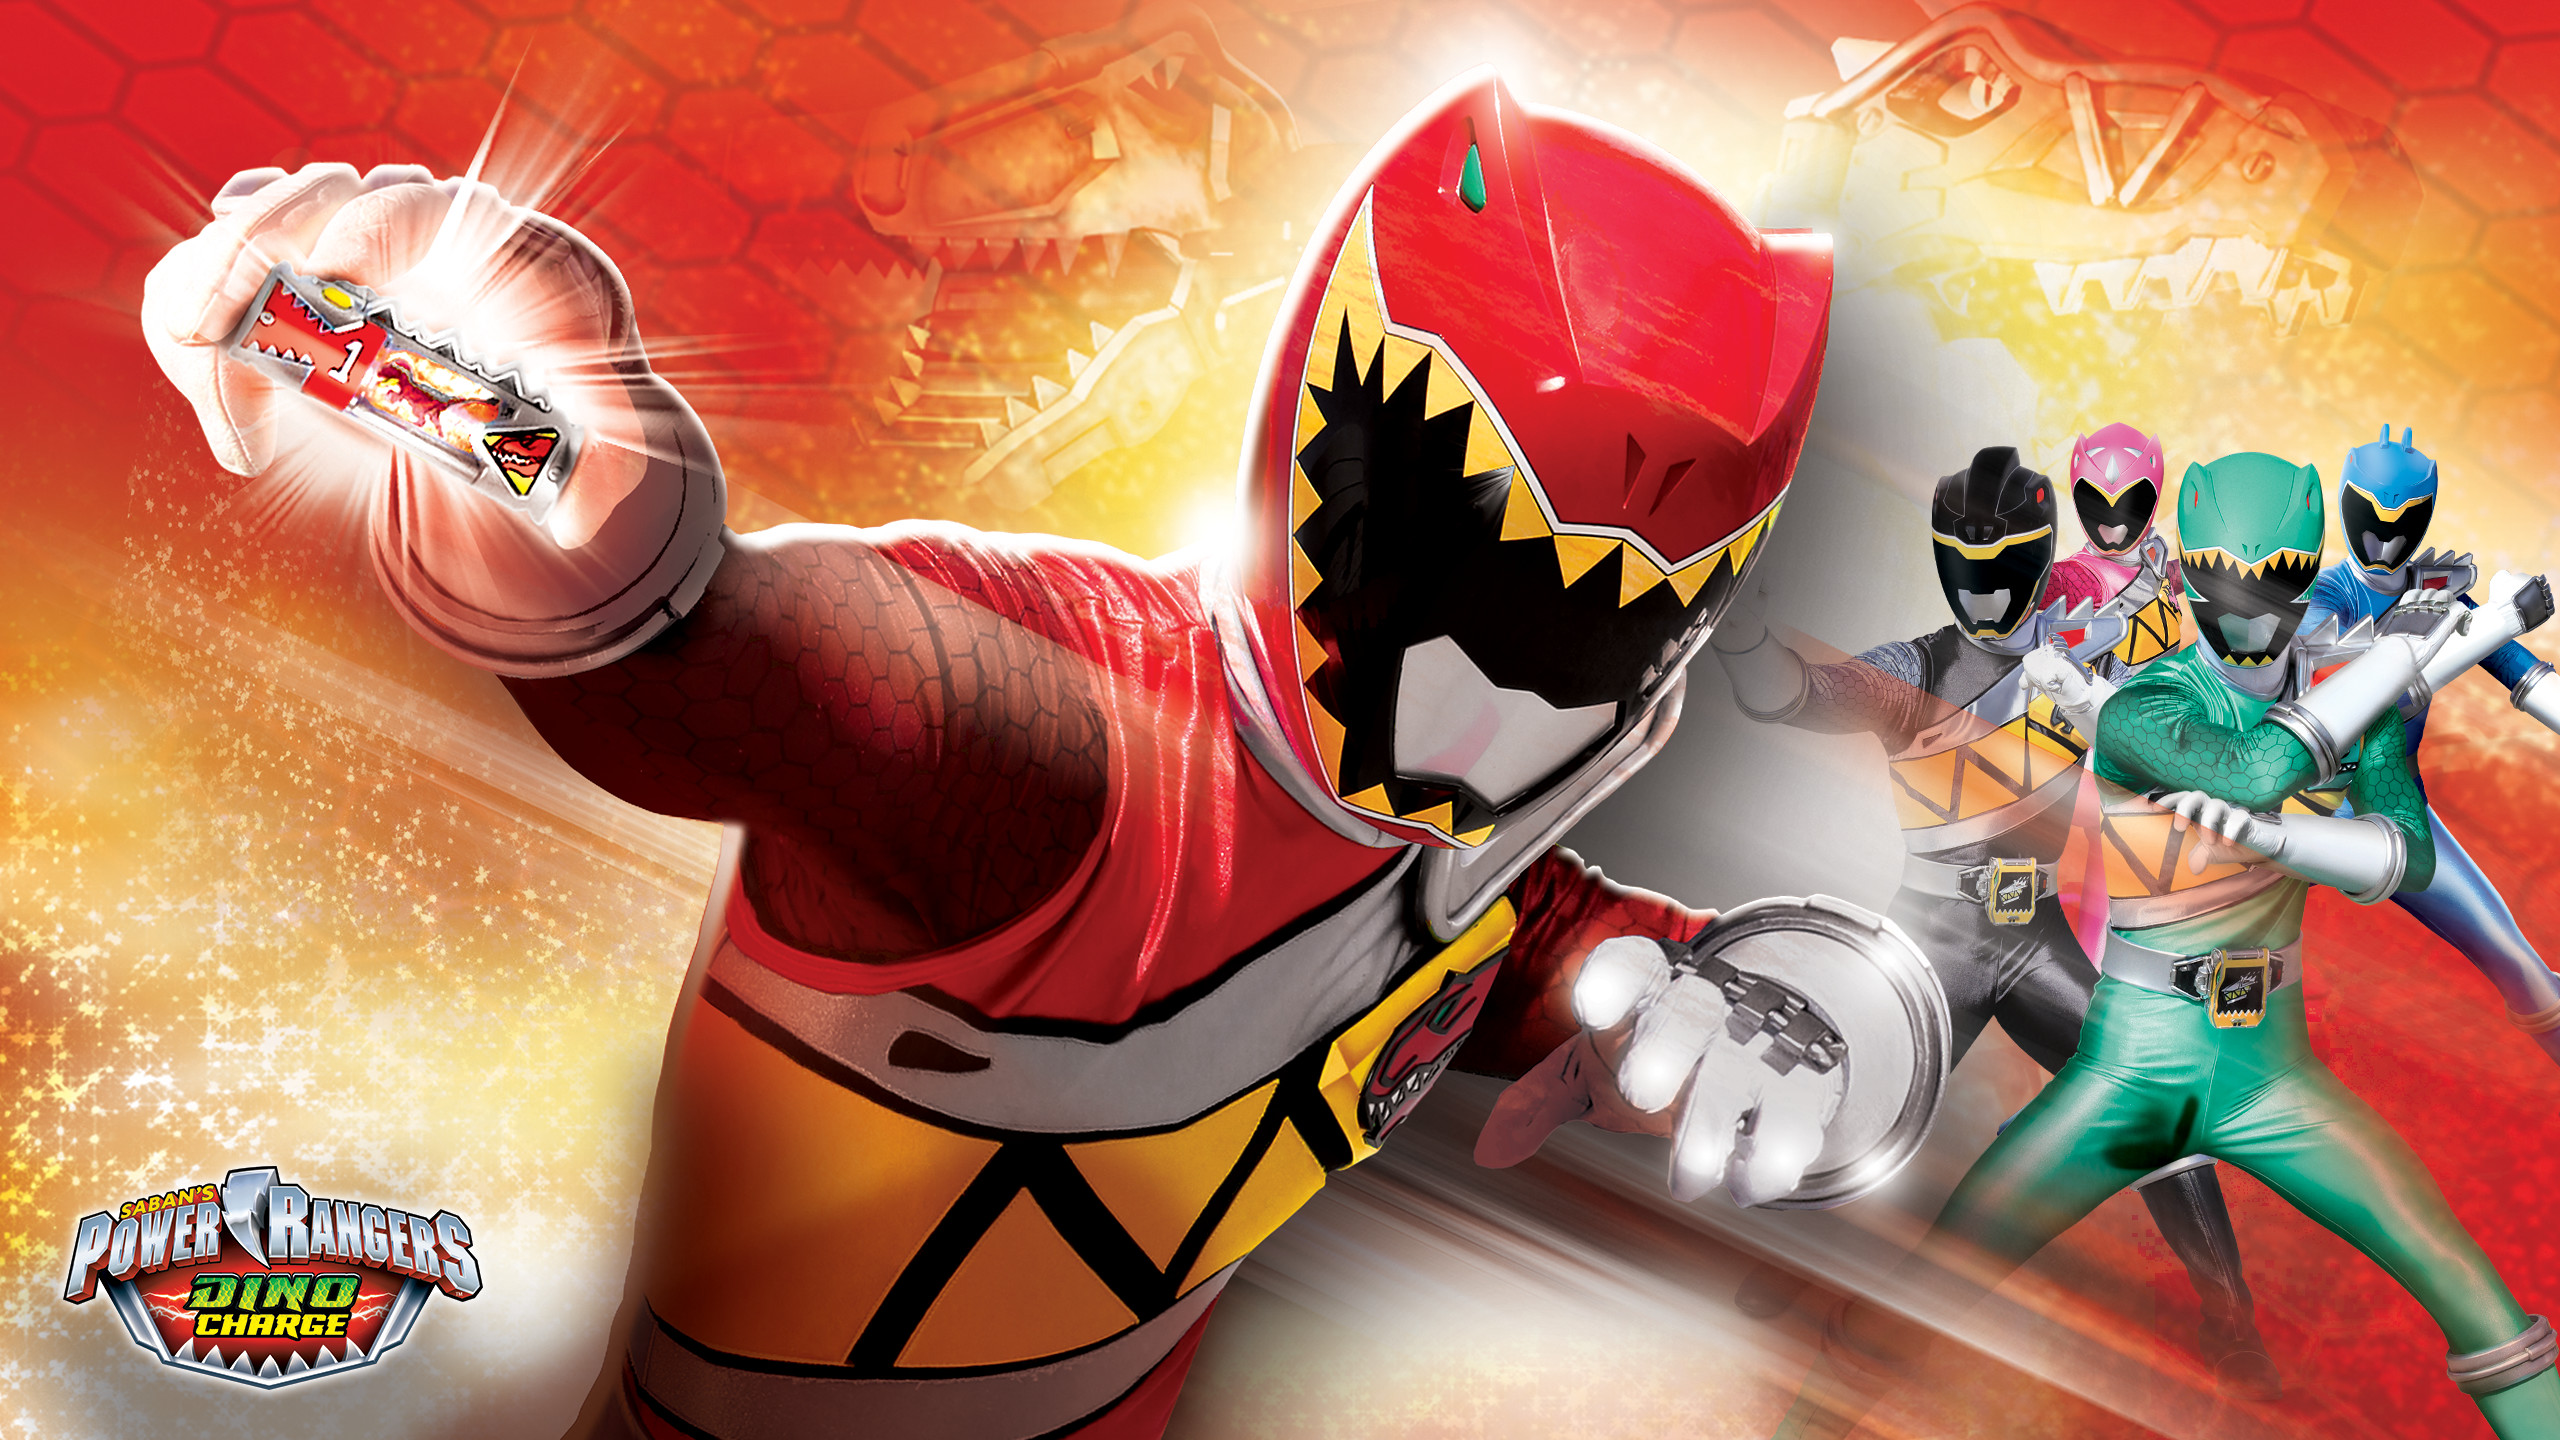 2560x1440 Dino Charge Red Ranger Wallpaper - Power Rangers - The Official .